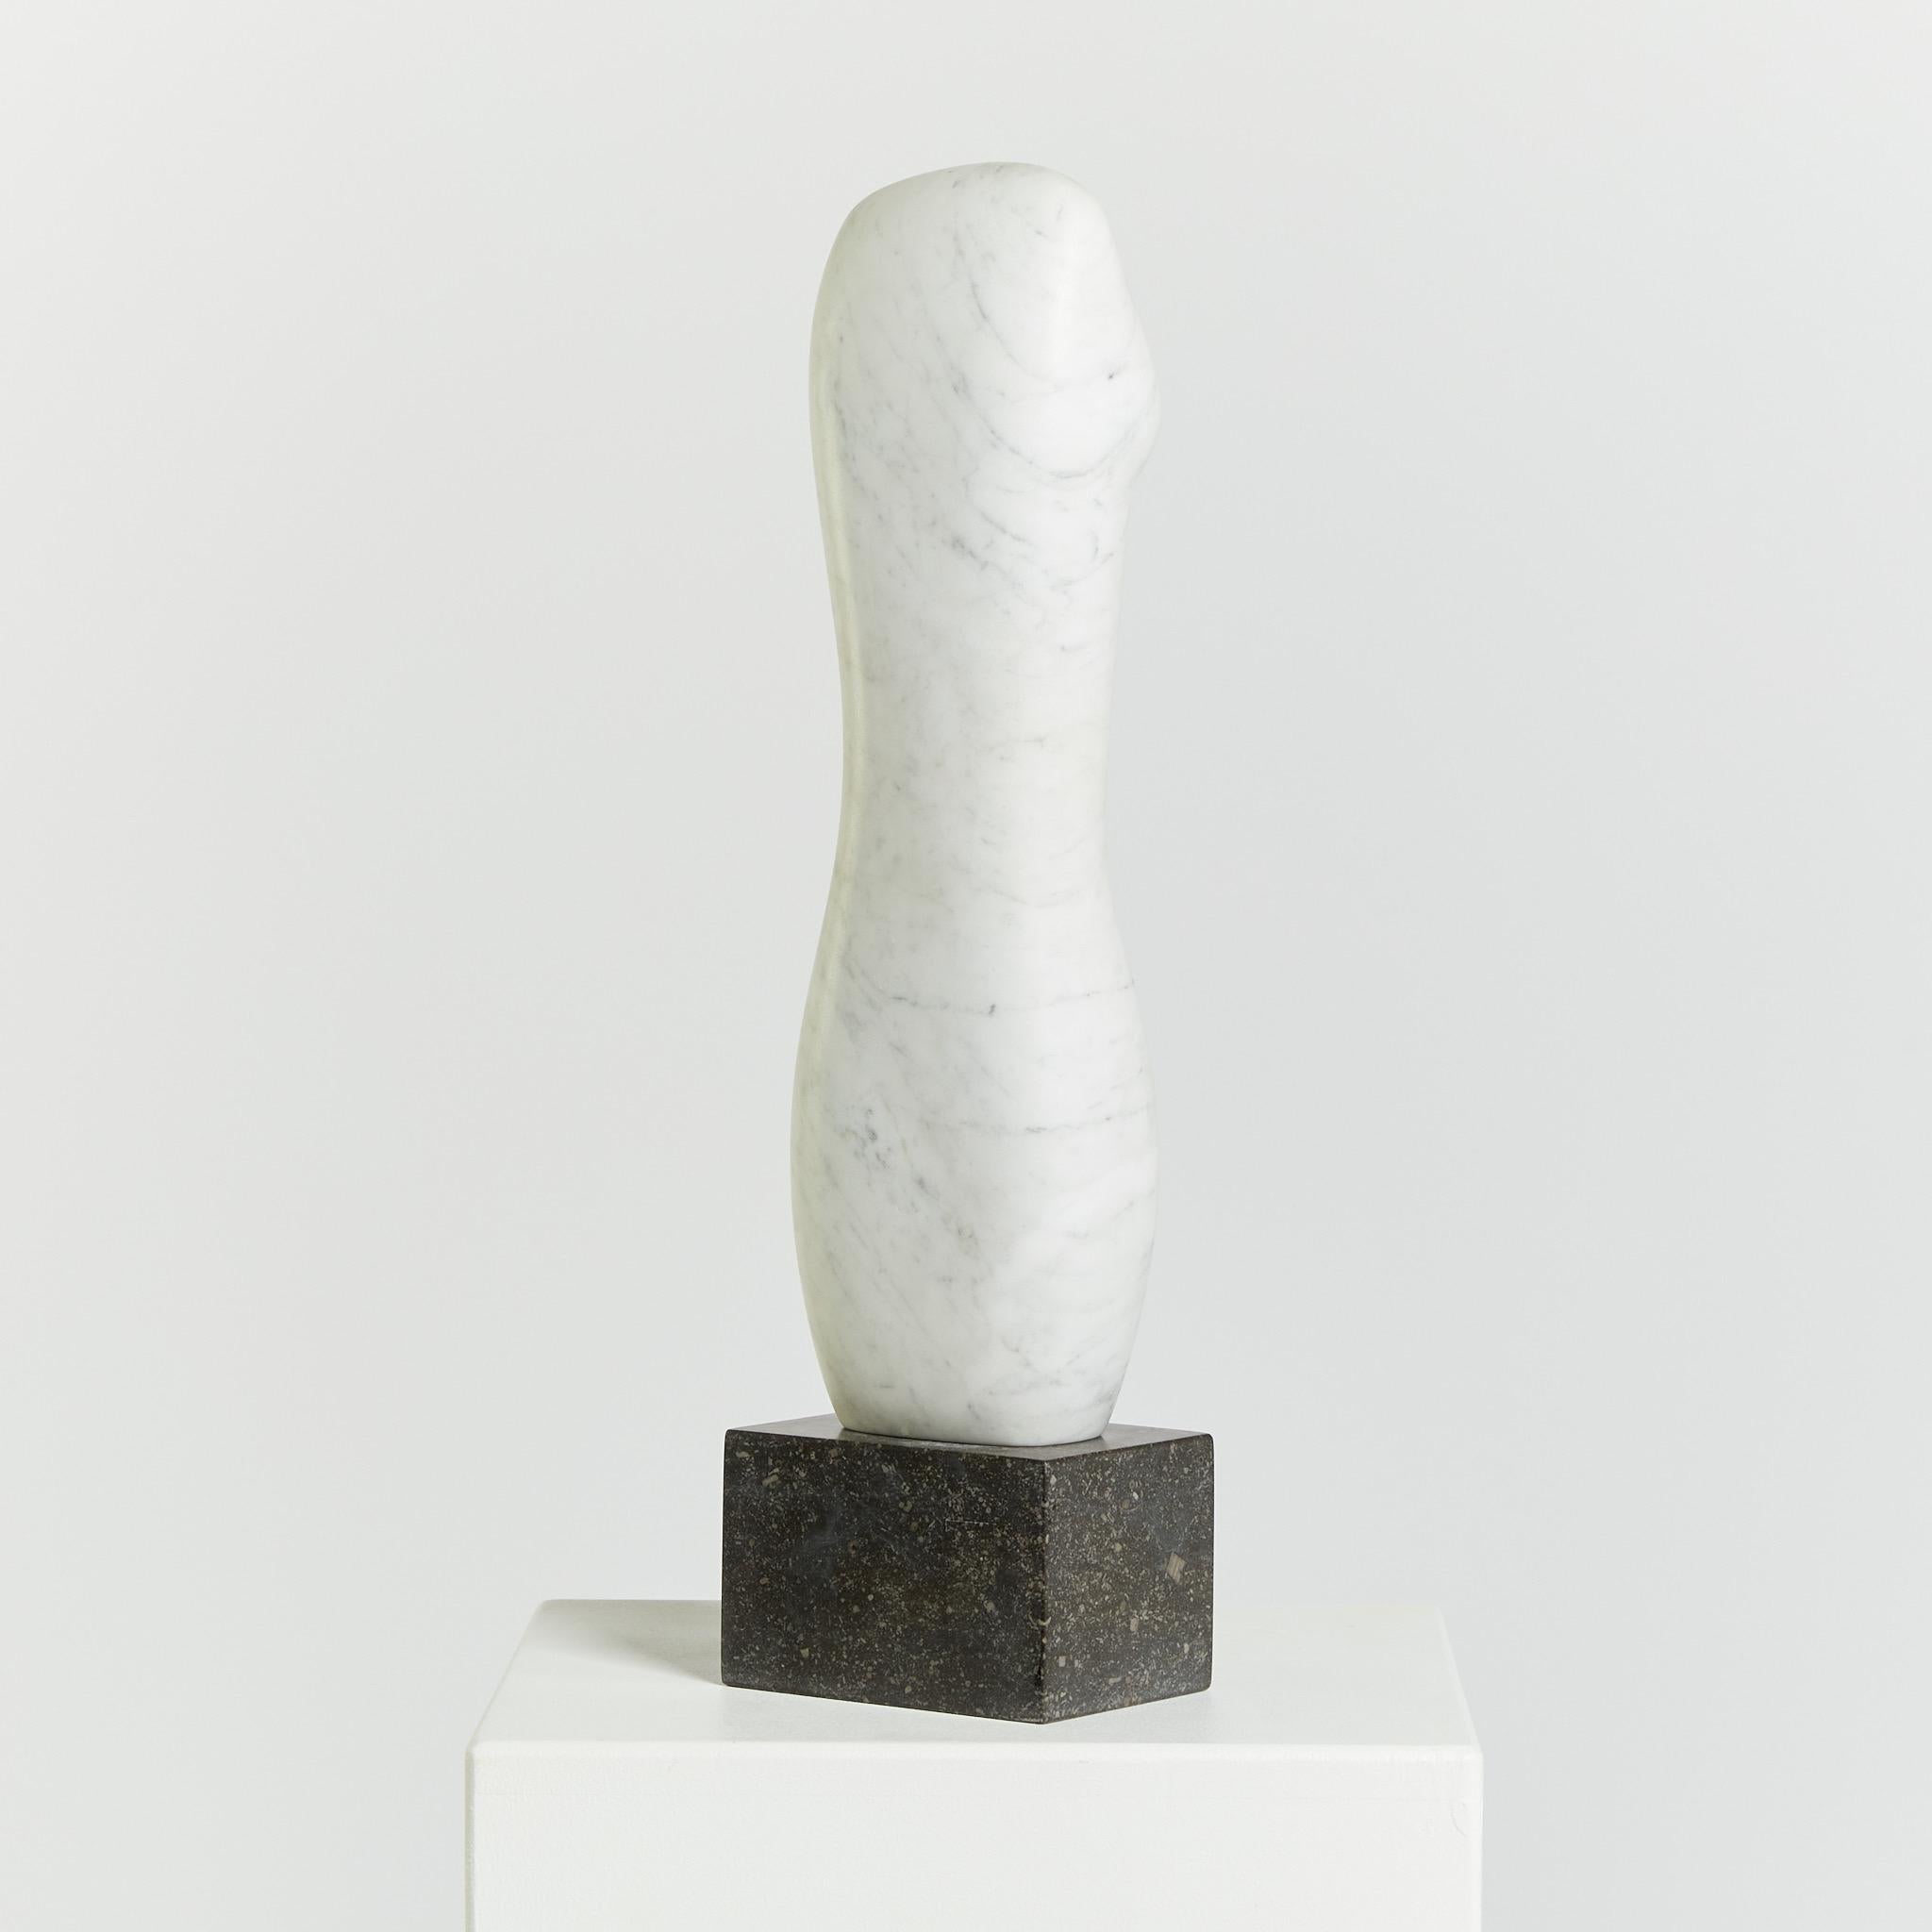 Hand-Carved Figurative Marble Sculpture on Granite Base